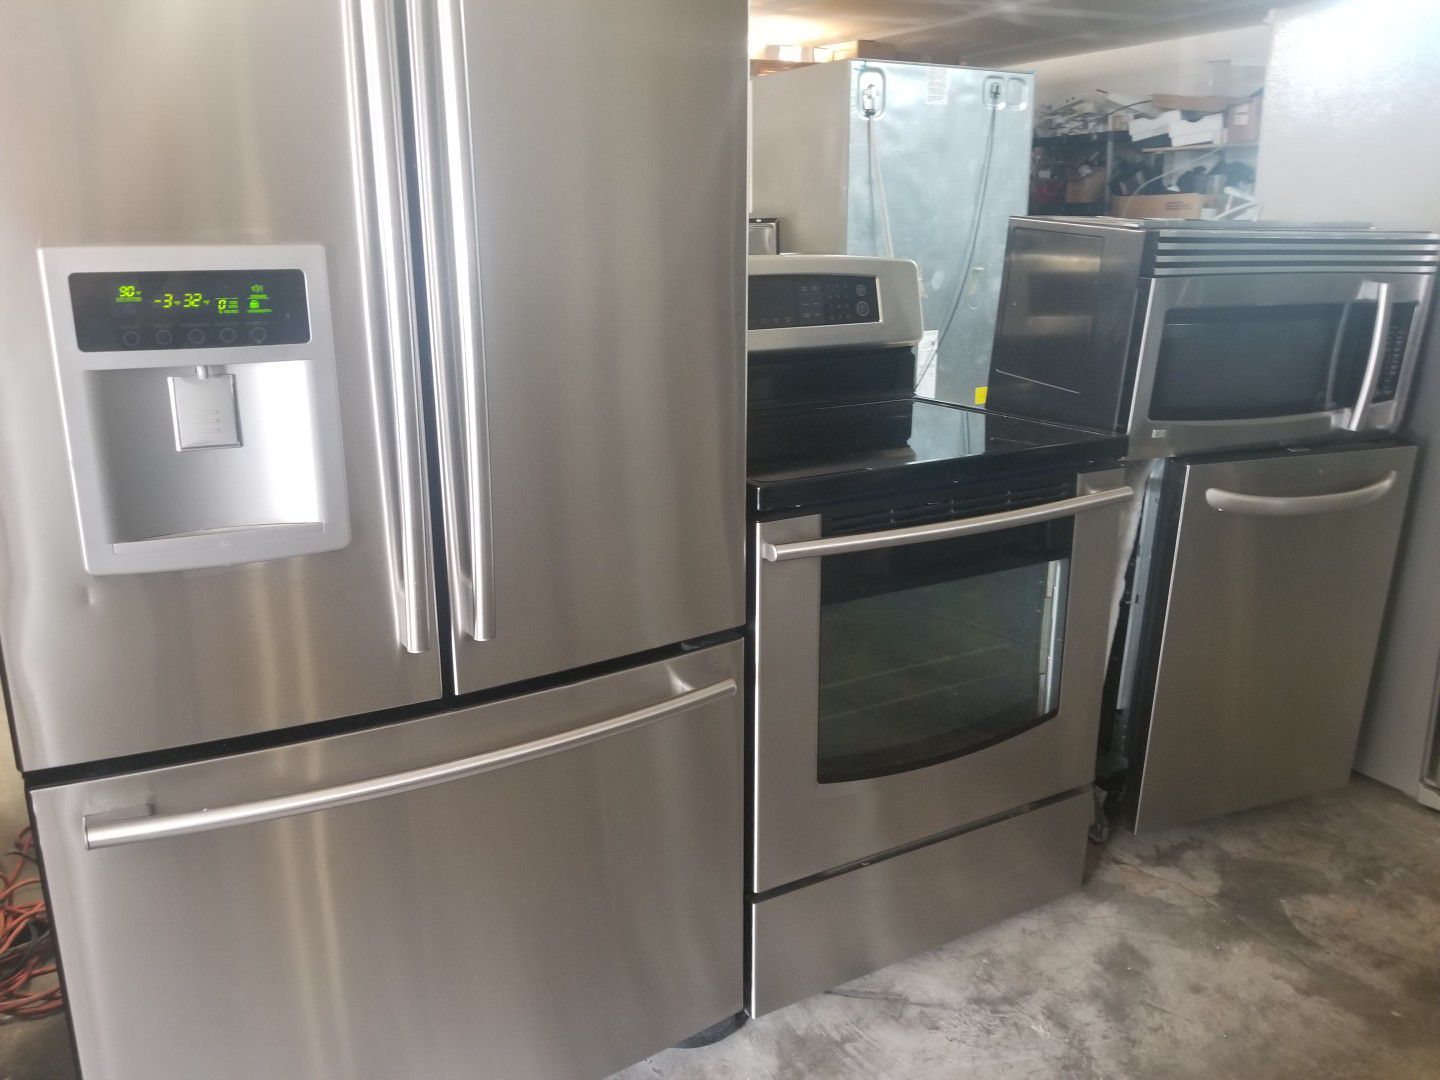 LG stainless steel appliances